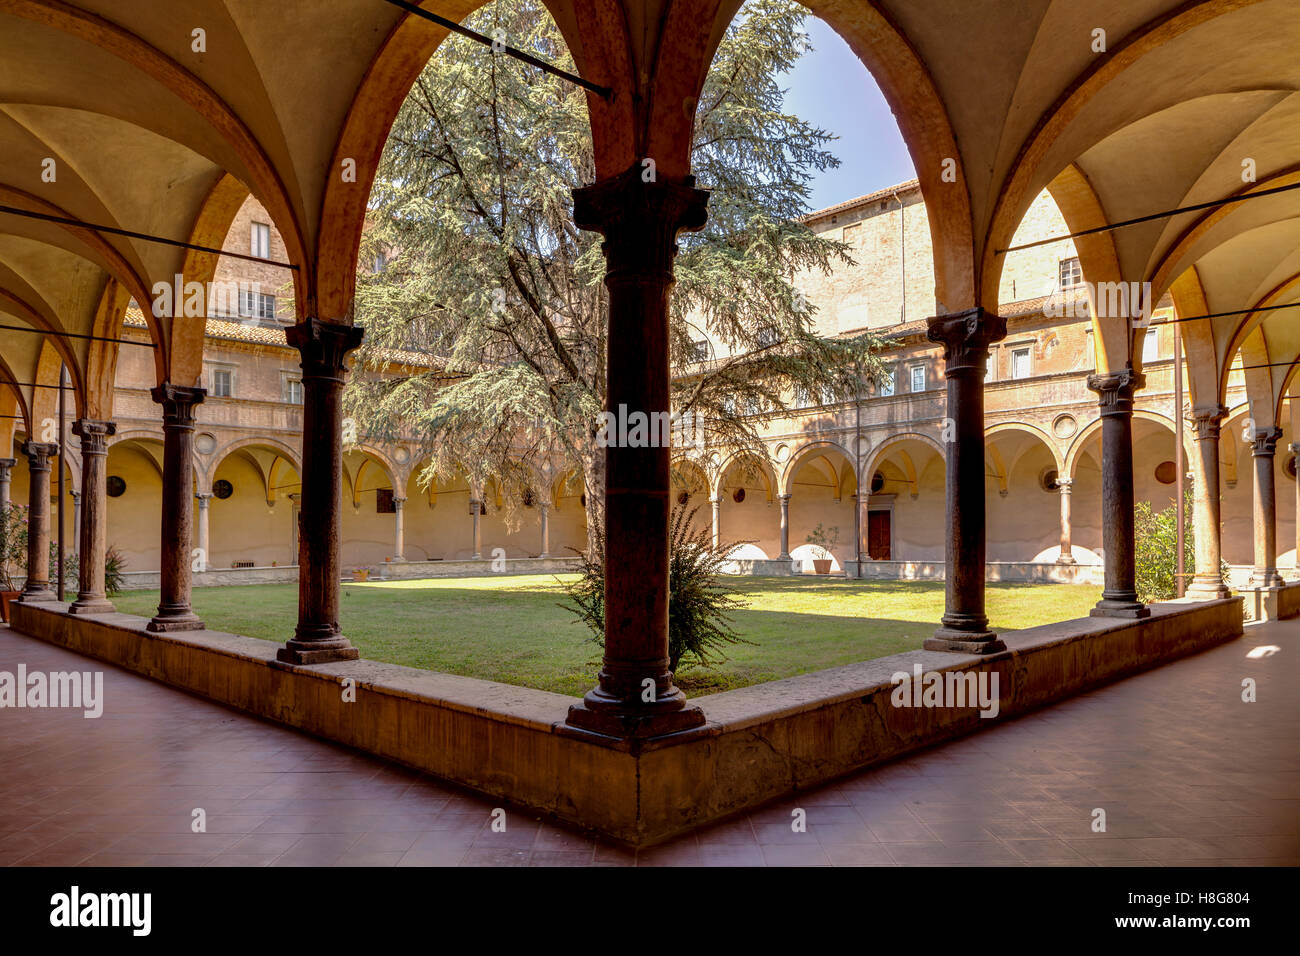 The cloister of San Giovanni Evangelista in Parma, Italy. The building dates from the late 15th century. Stock Photo